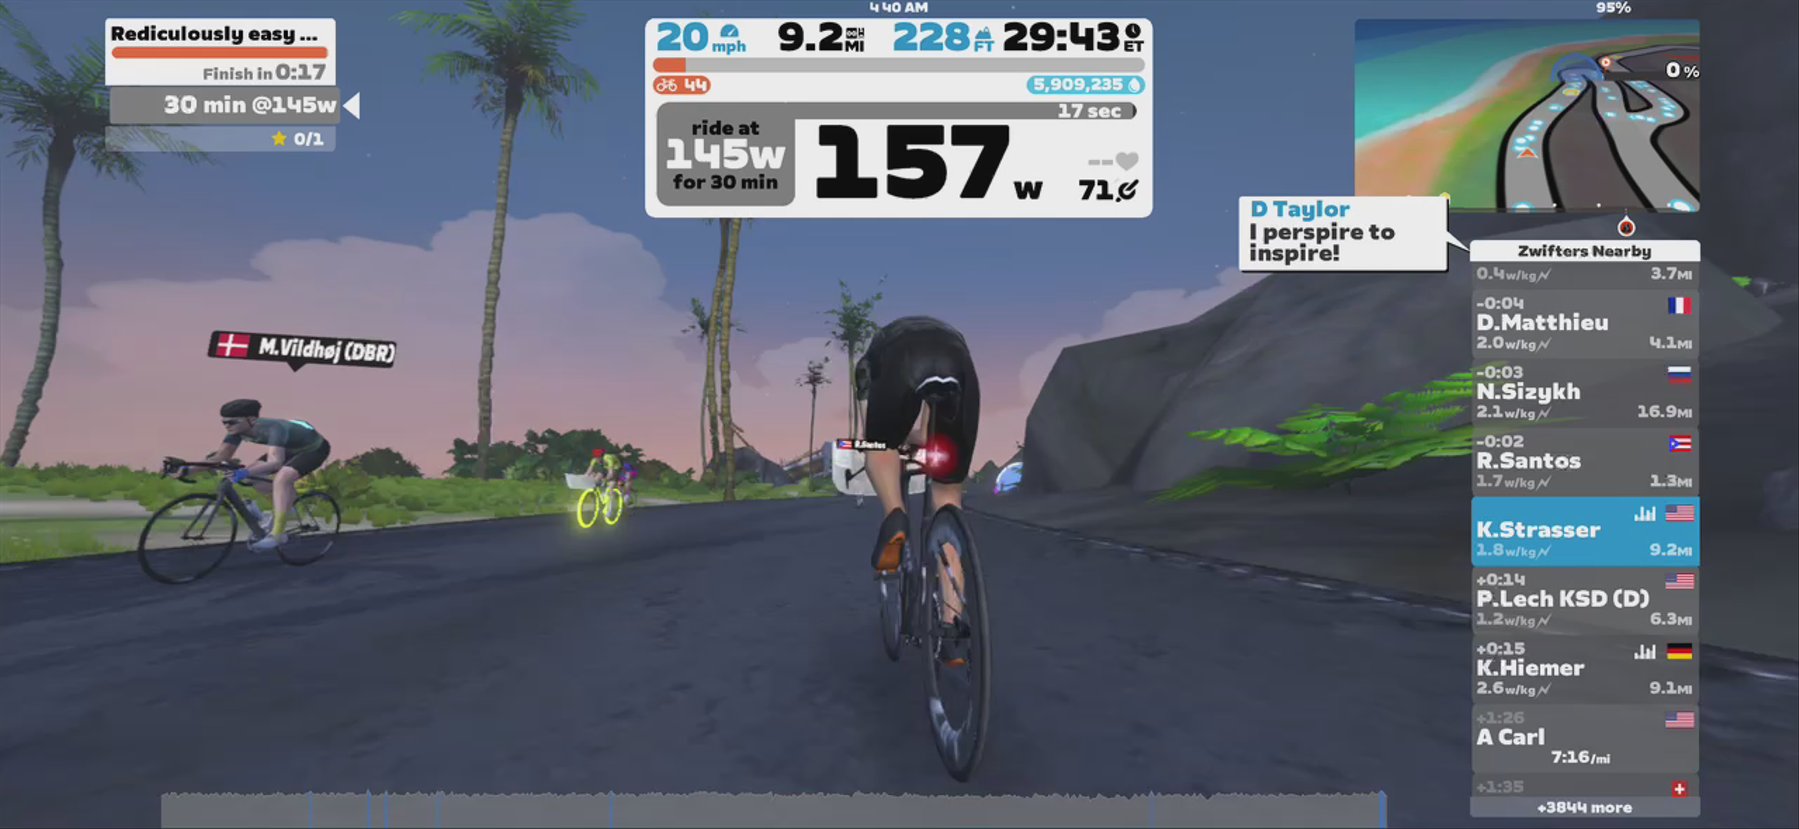 Zwift - Rediculously easy short spin in Watopia